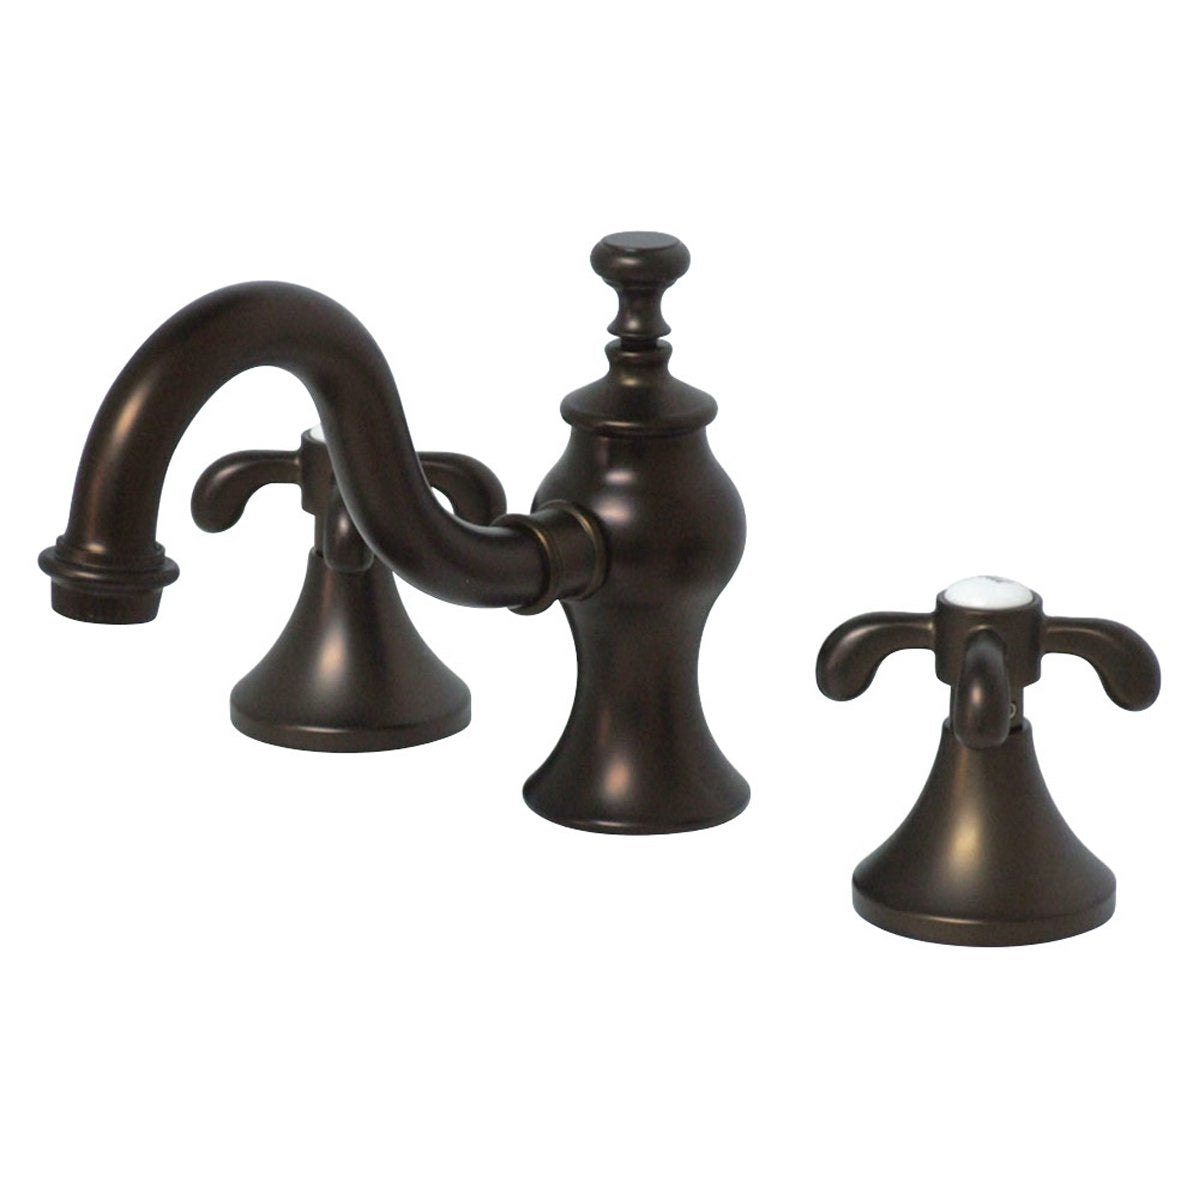 Kingston Brass French Country 8" Widespread Bathroom Faucet